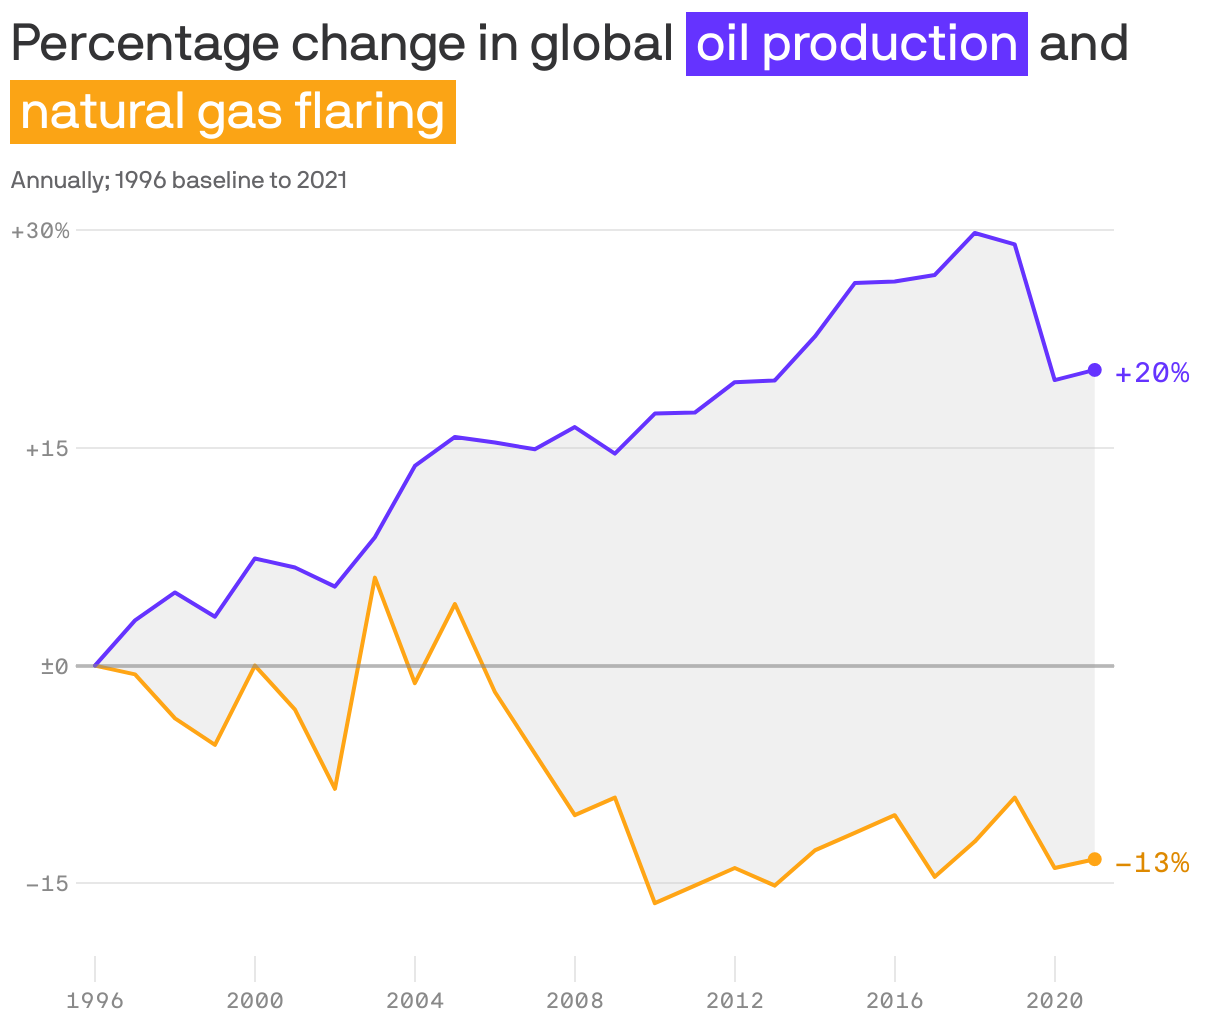 Percentage change in global <span style="background:#6533FF; padding:3px 5px;color:white;">oil production</span> and <span style="background:#FBA415; padding:3px 5px;color:white;">natural gas flaring</span> 